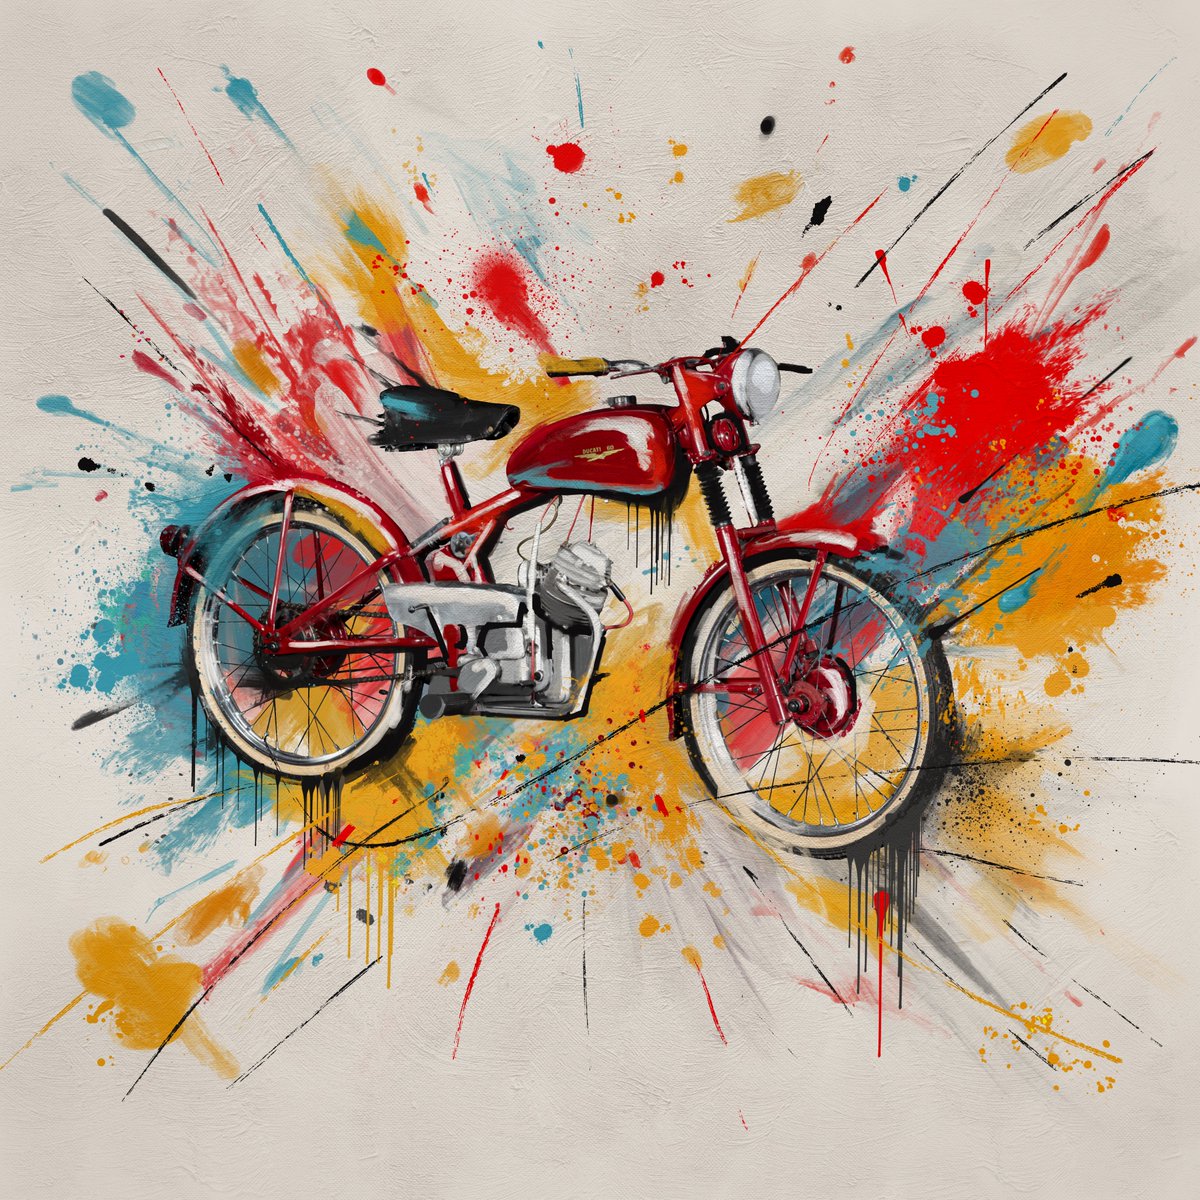 Next we travel to 1949 with the Ducati 60, vibrantly illustrated in the Abstract Expressionist style.

#DucatiLove